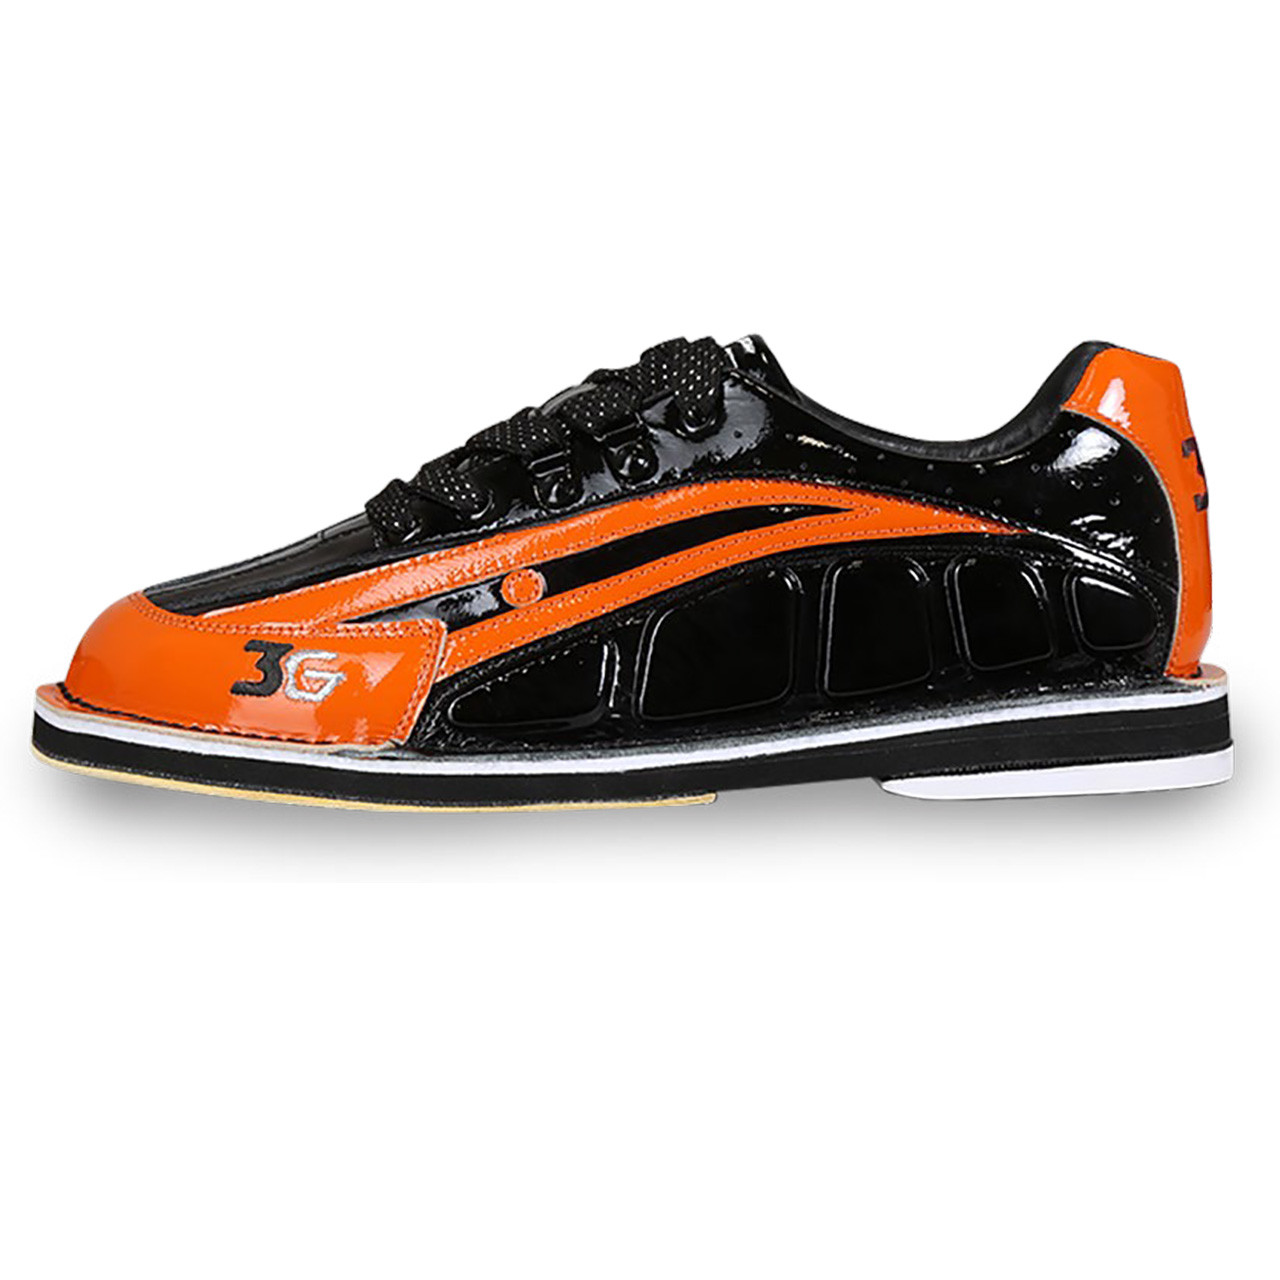 3G Tour Ultra/C Men's Bowling Shoes Black/Orange - Right Handed FREE  SHIPPING 